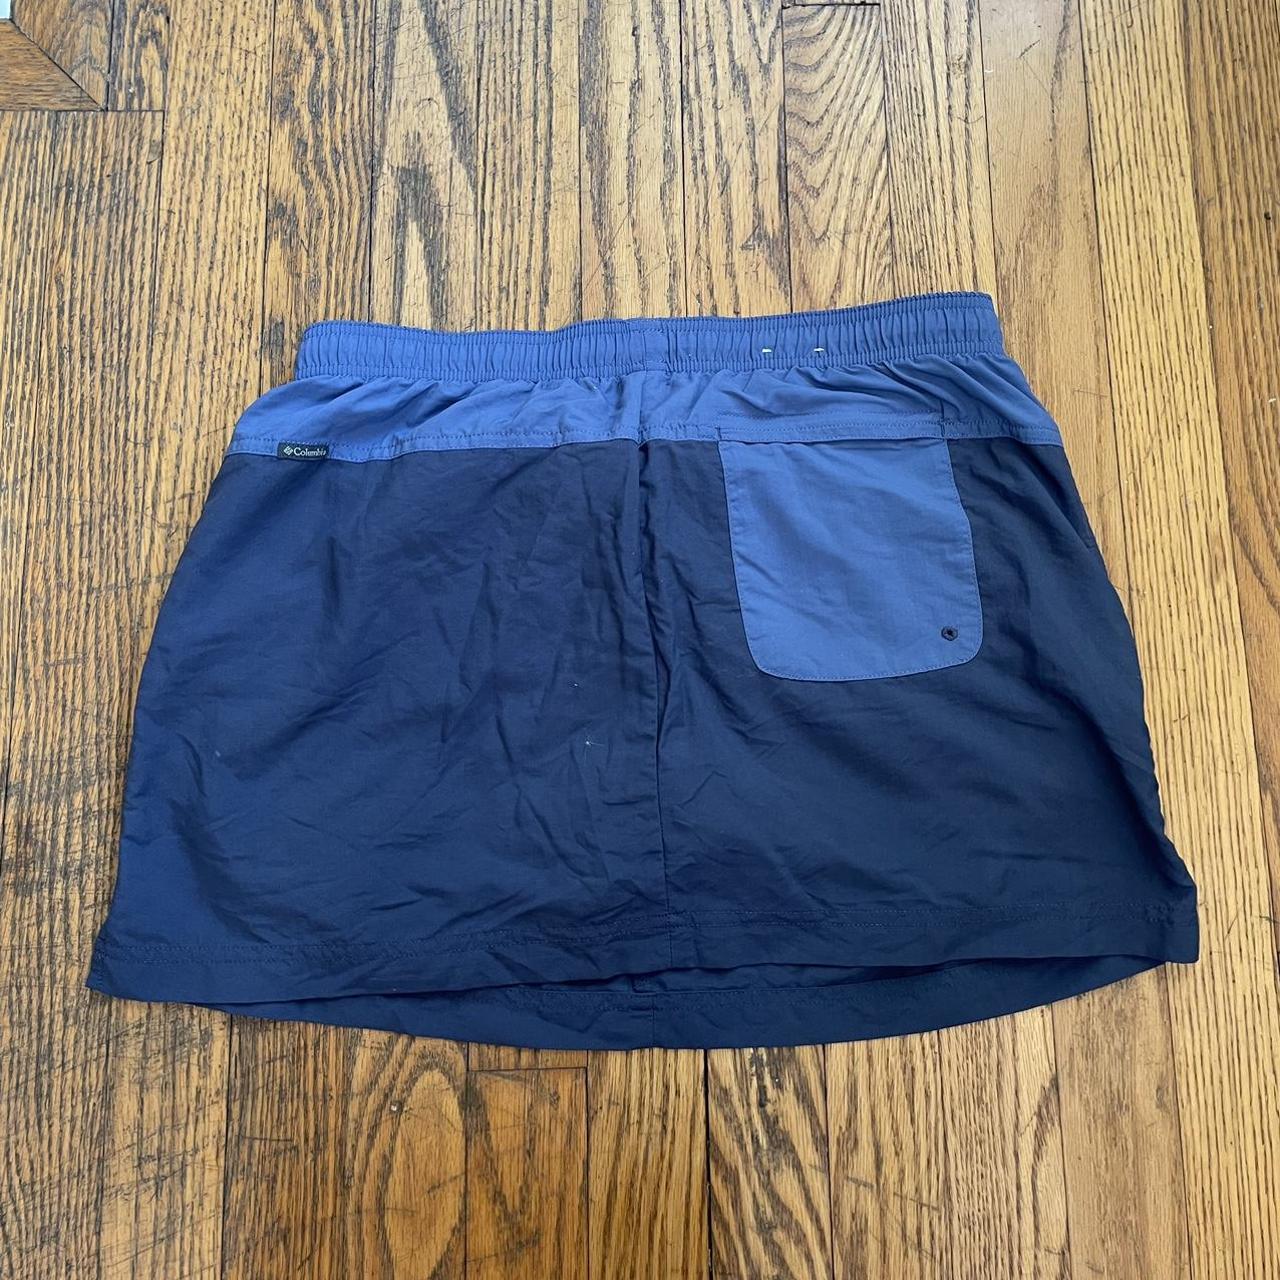 Brand Columbia skort! (These new are about $60 from... - Depop